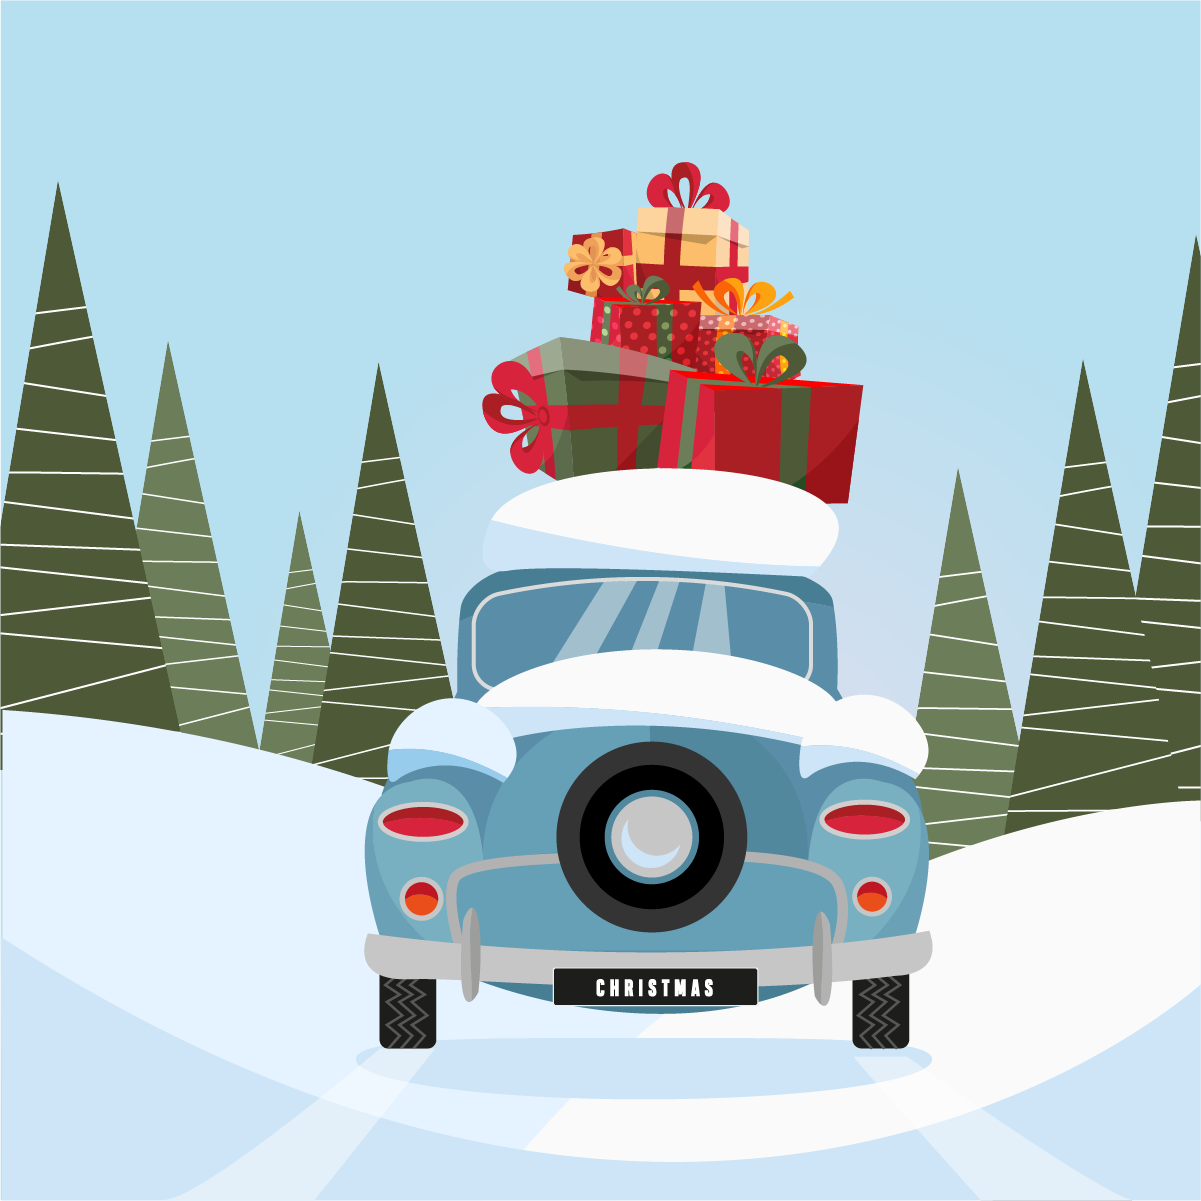 Artwork of a car in snowy environment with Christmas presents on the roof rack